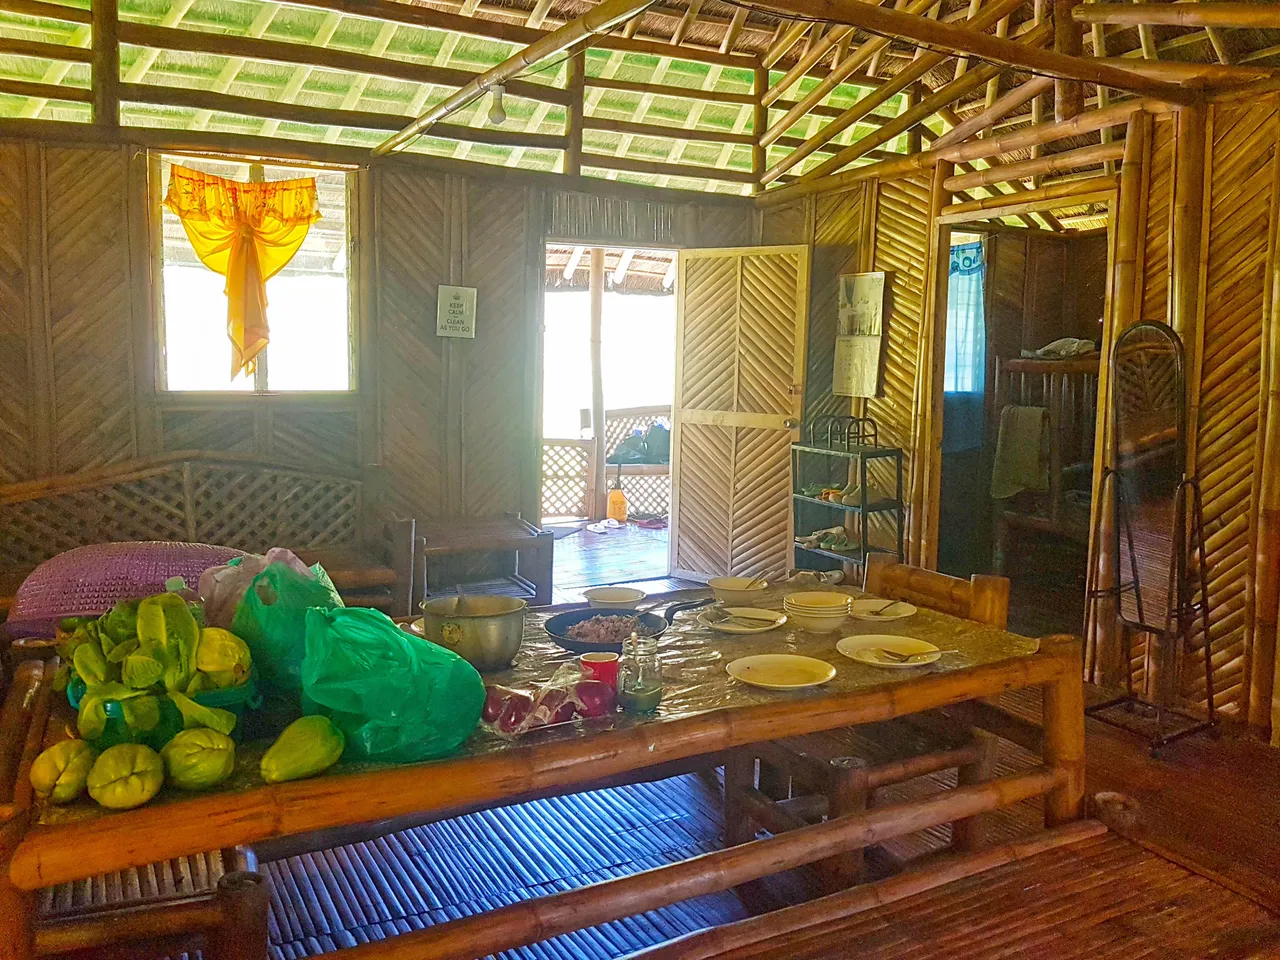 Inside the 2-Bedroom Hut where conversations are made